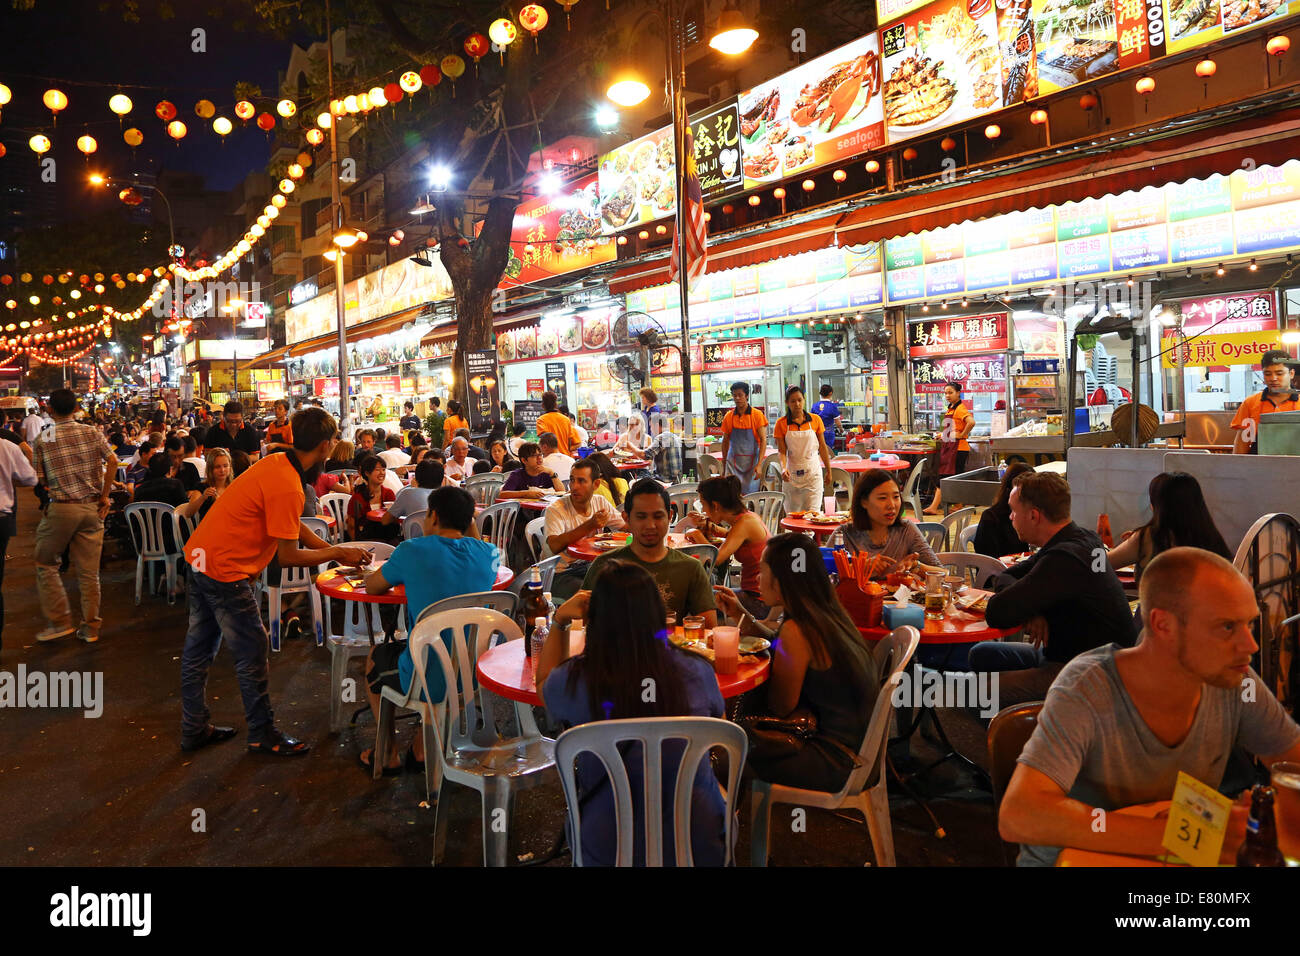 People eating at outdoor restaurants and street food in Jalan Alor in